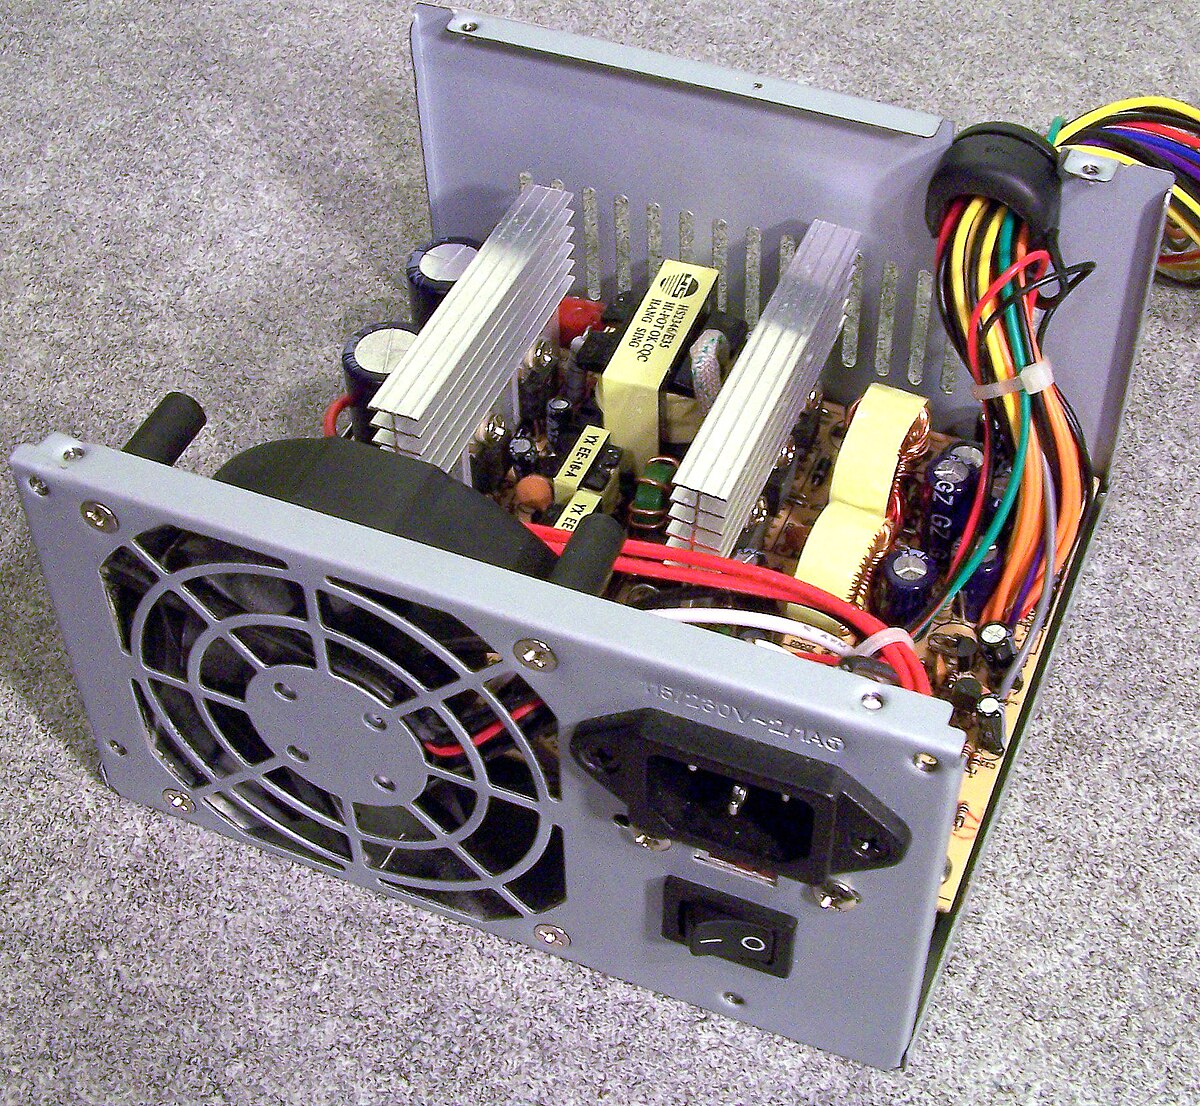 A computer with a power supply issue